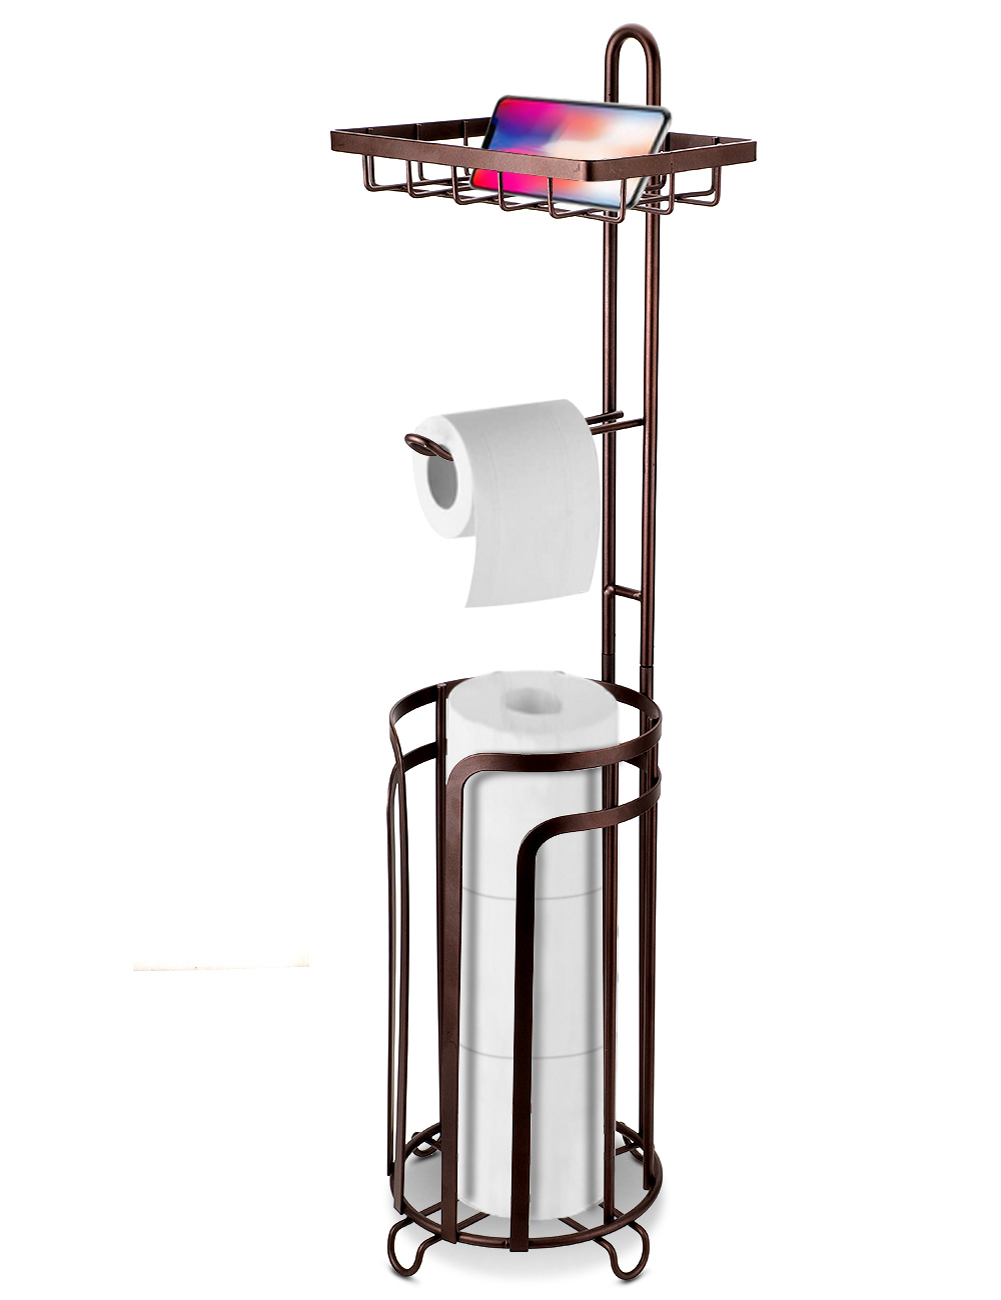 Metal Compact Hanging Over the Tank Toilet Tissue Paper Roll Holder and  Dispenser for Bathroom Storage